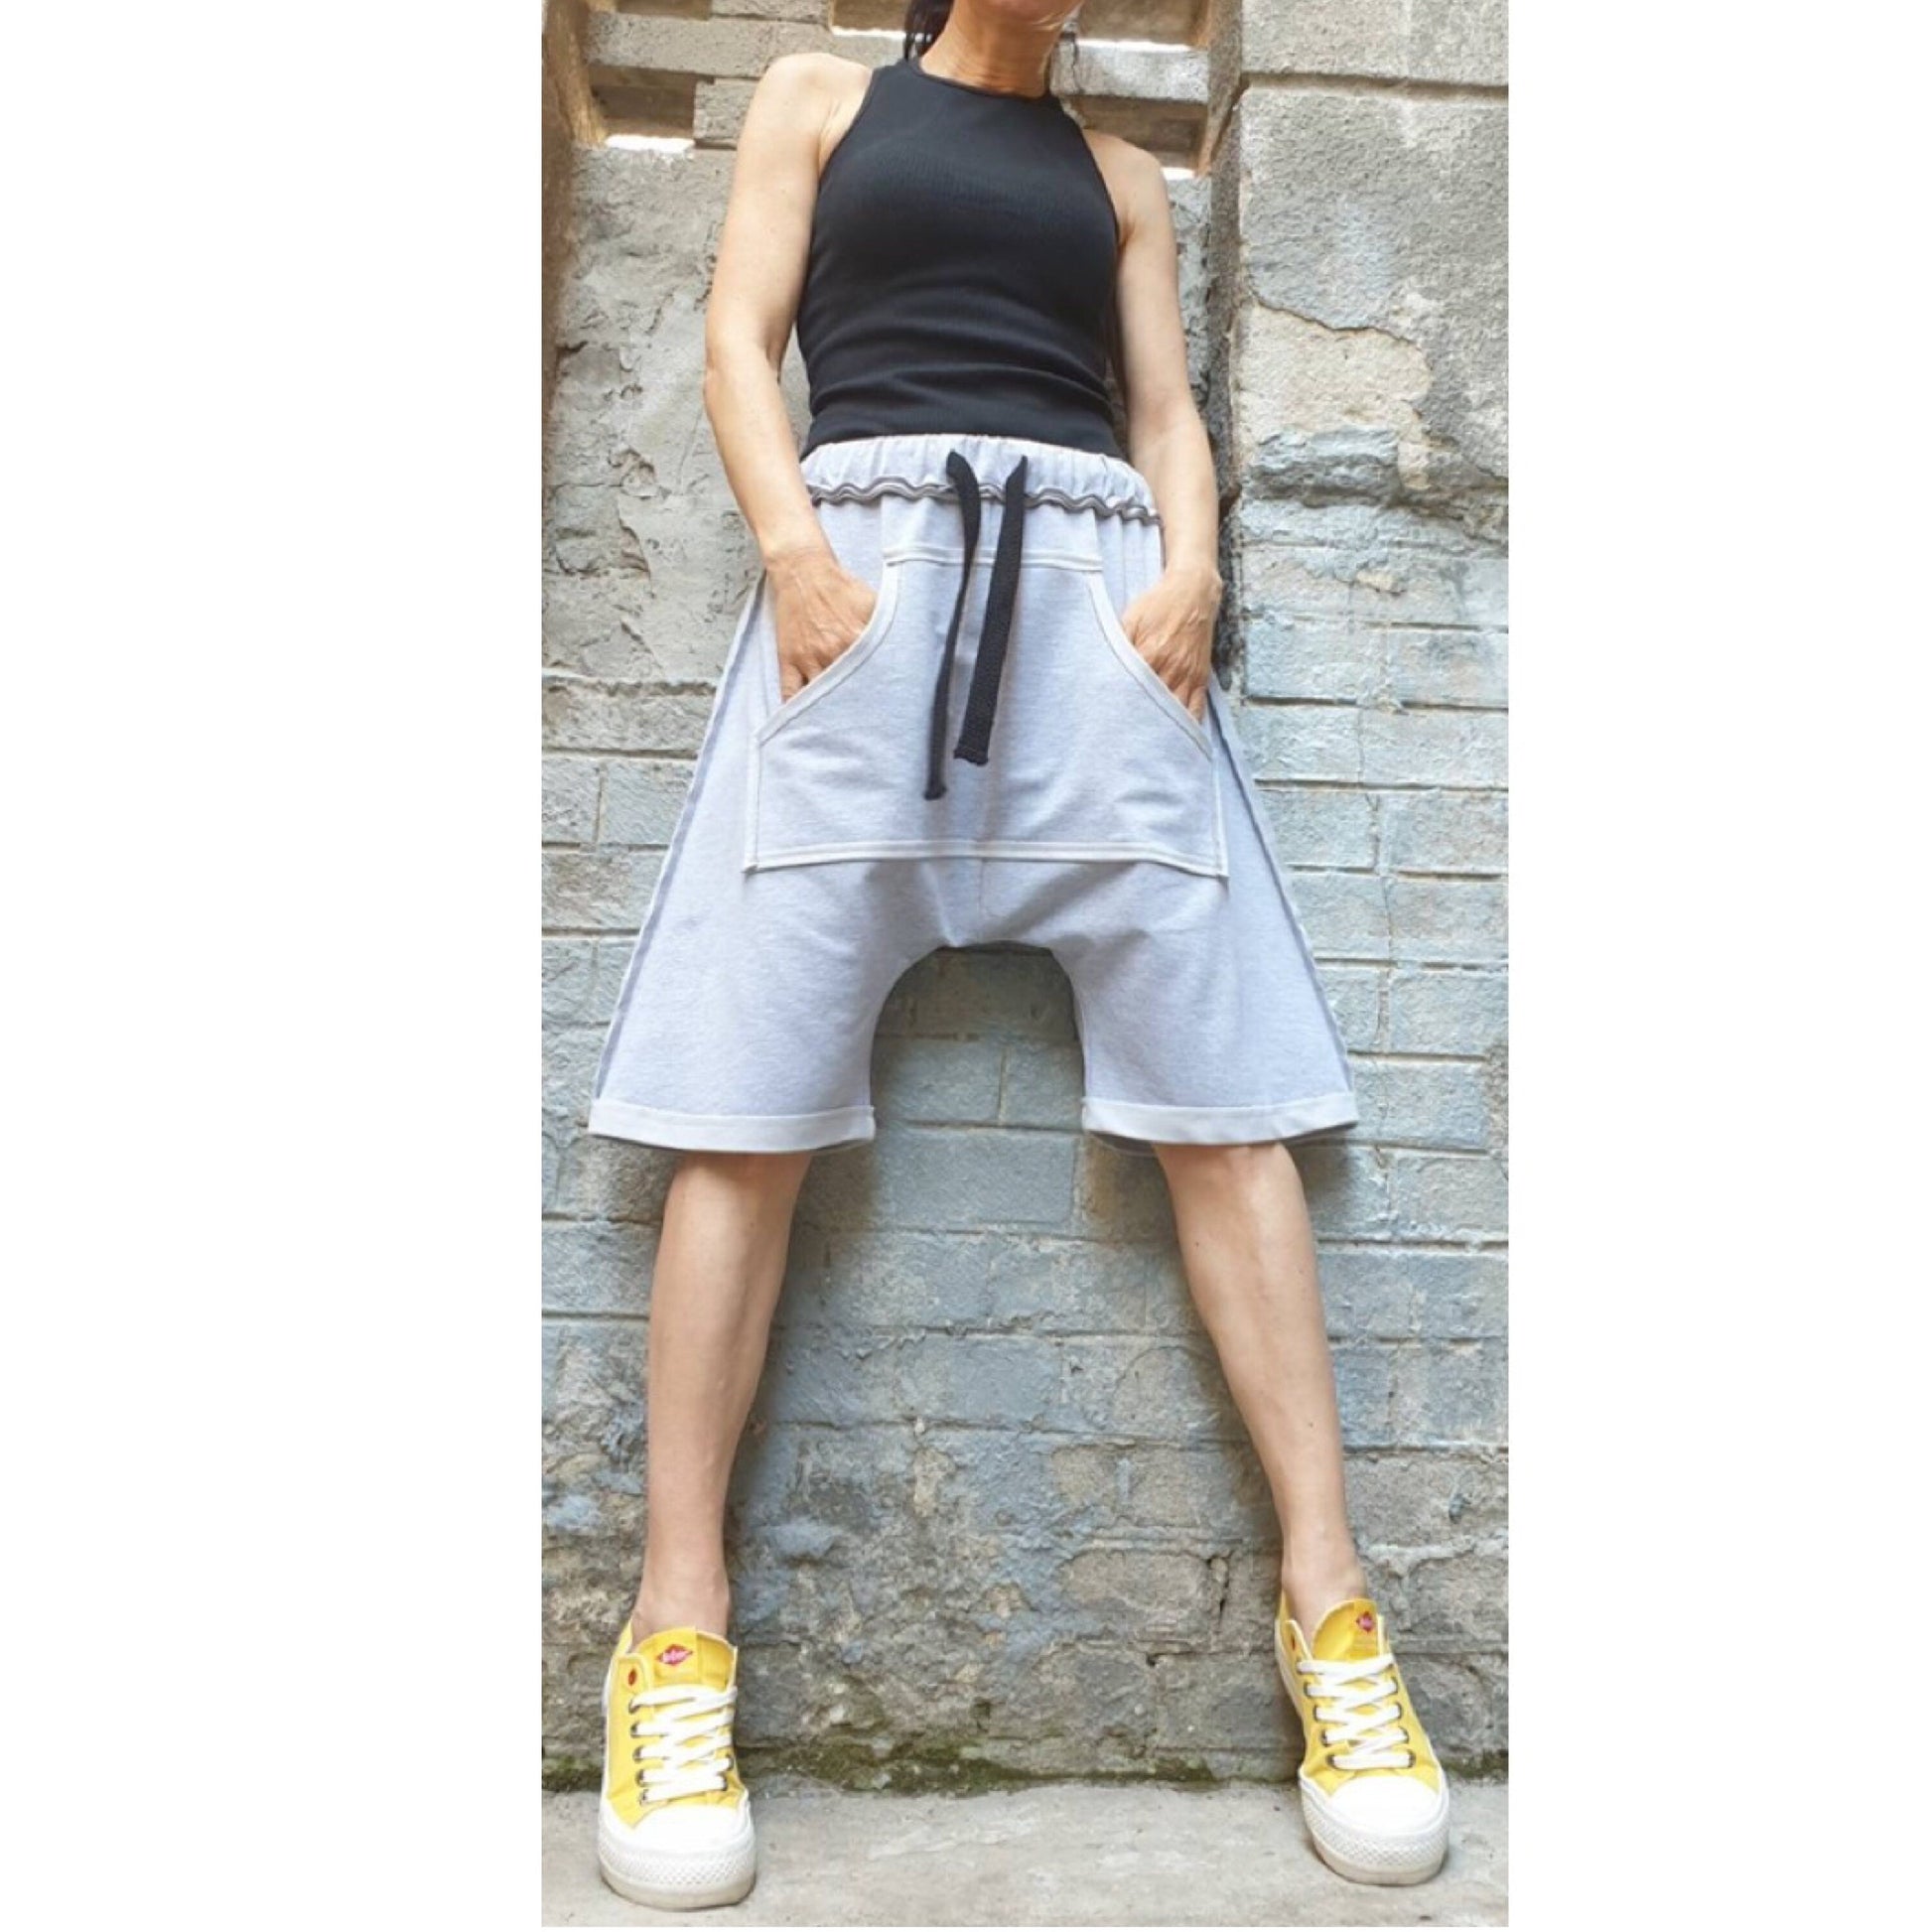 New Collection Short Grey Pants - Handmade clothing from AngelBySilvia - Top Designer Brands 